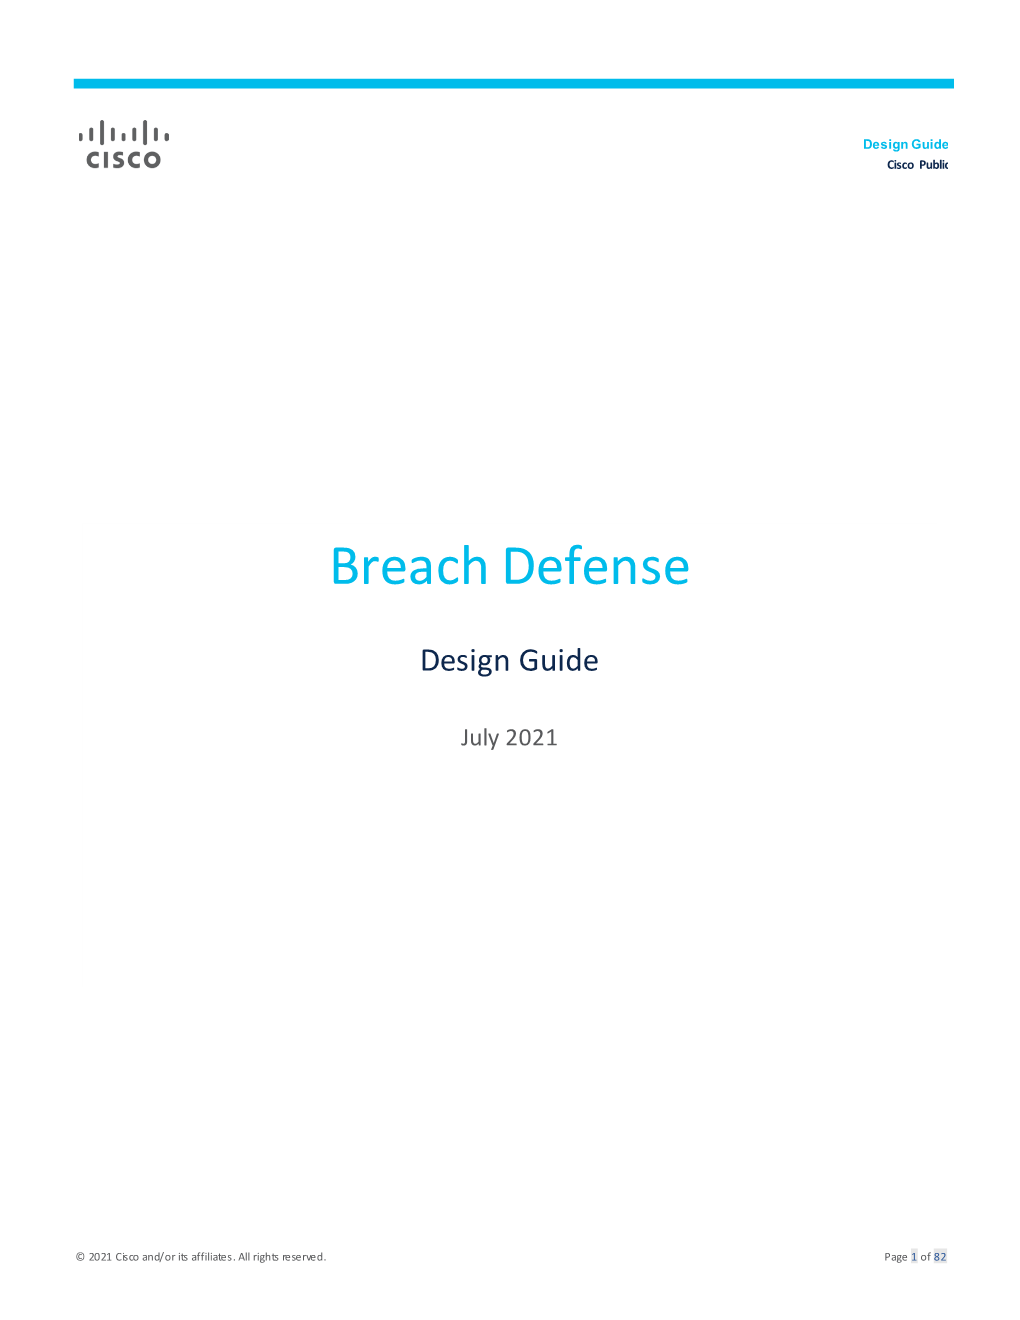 Breach Defense Design Guide Covers the Following Components